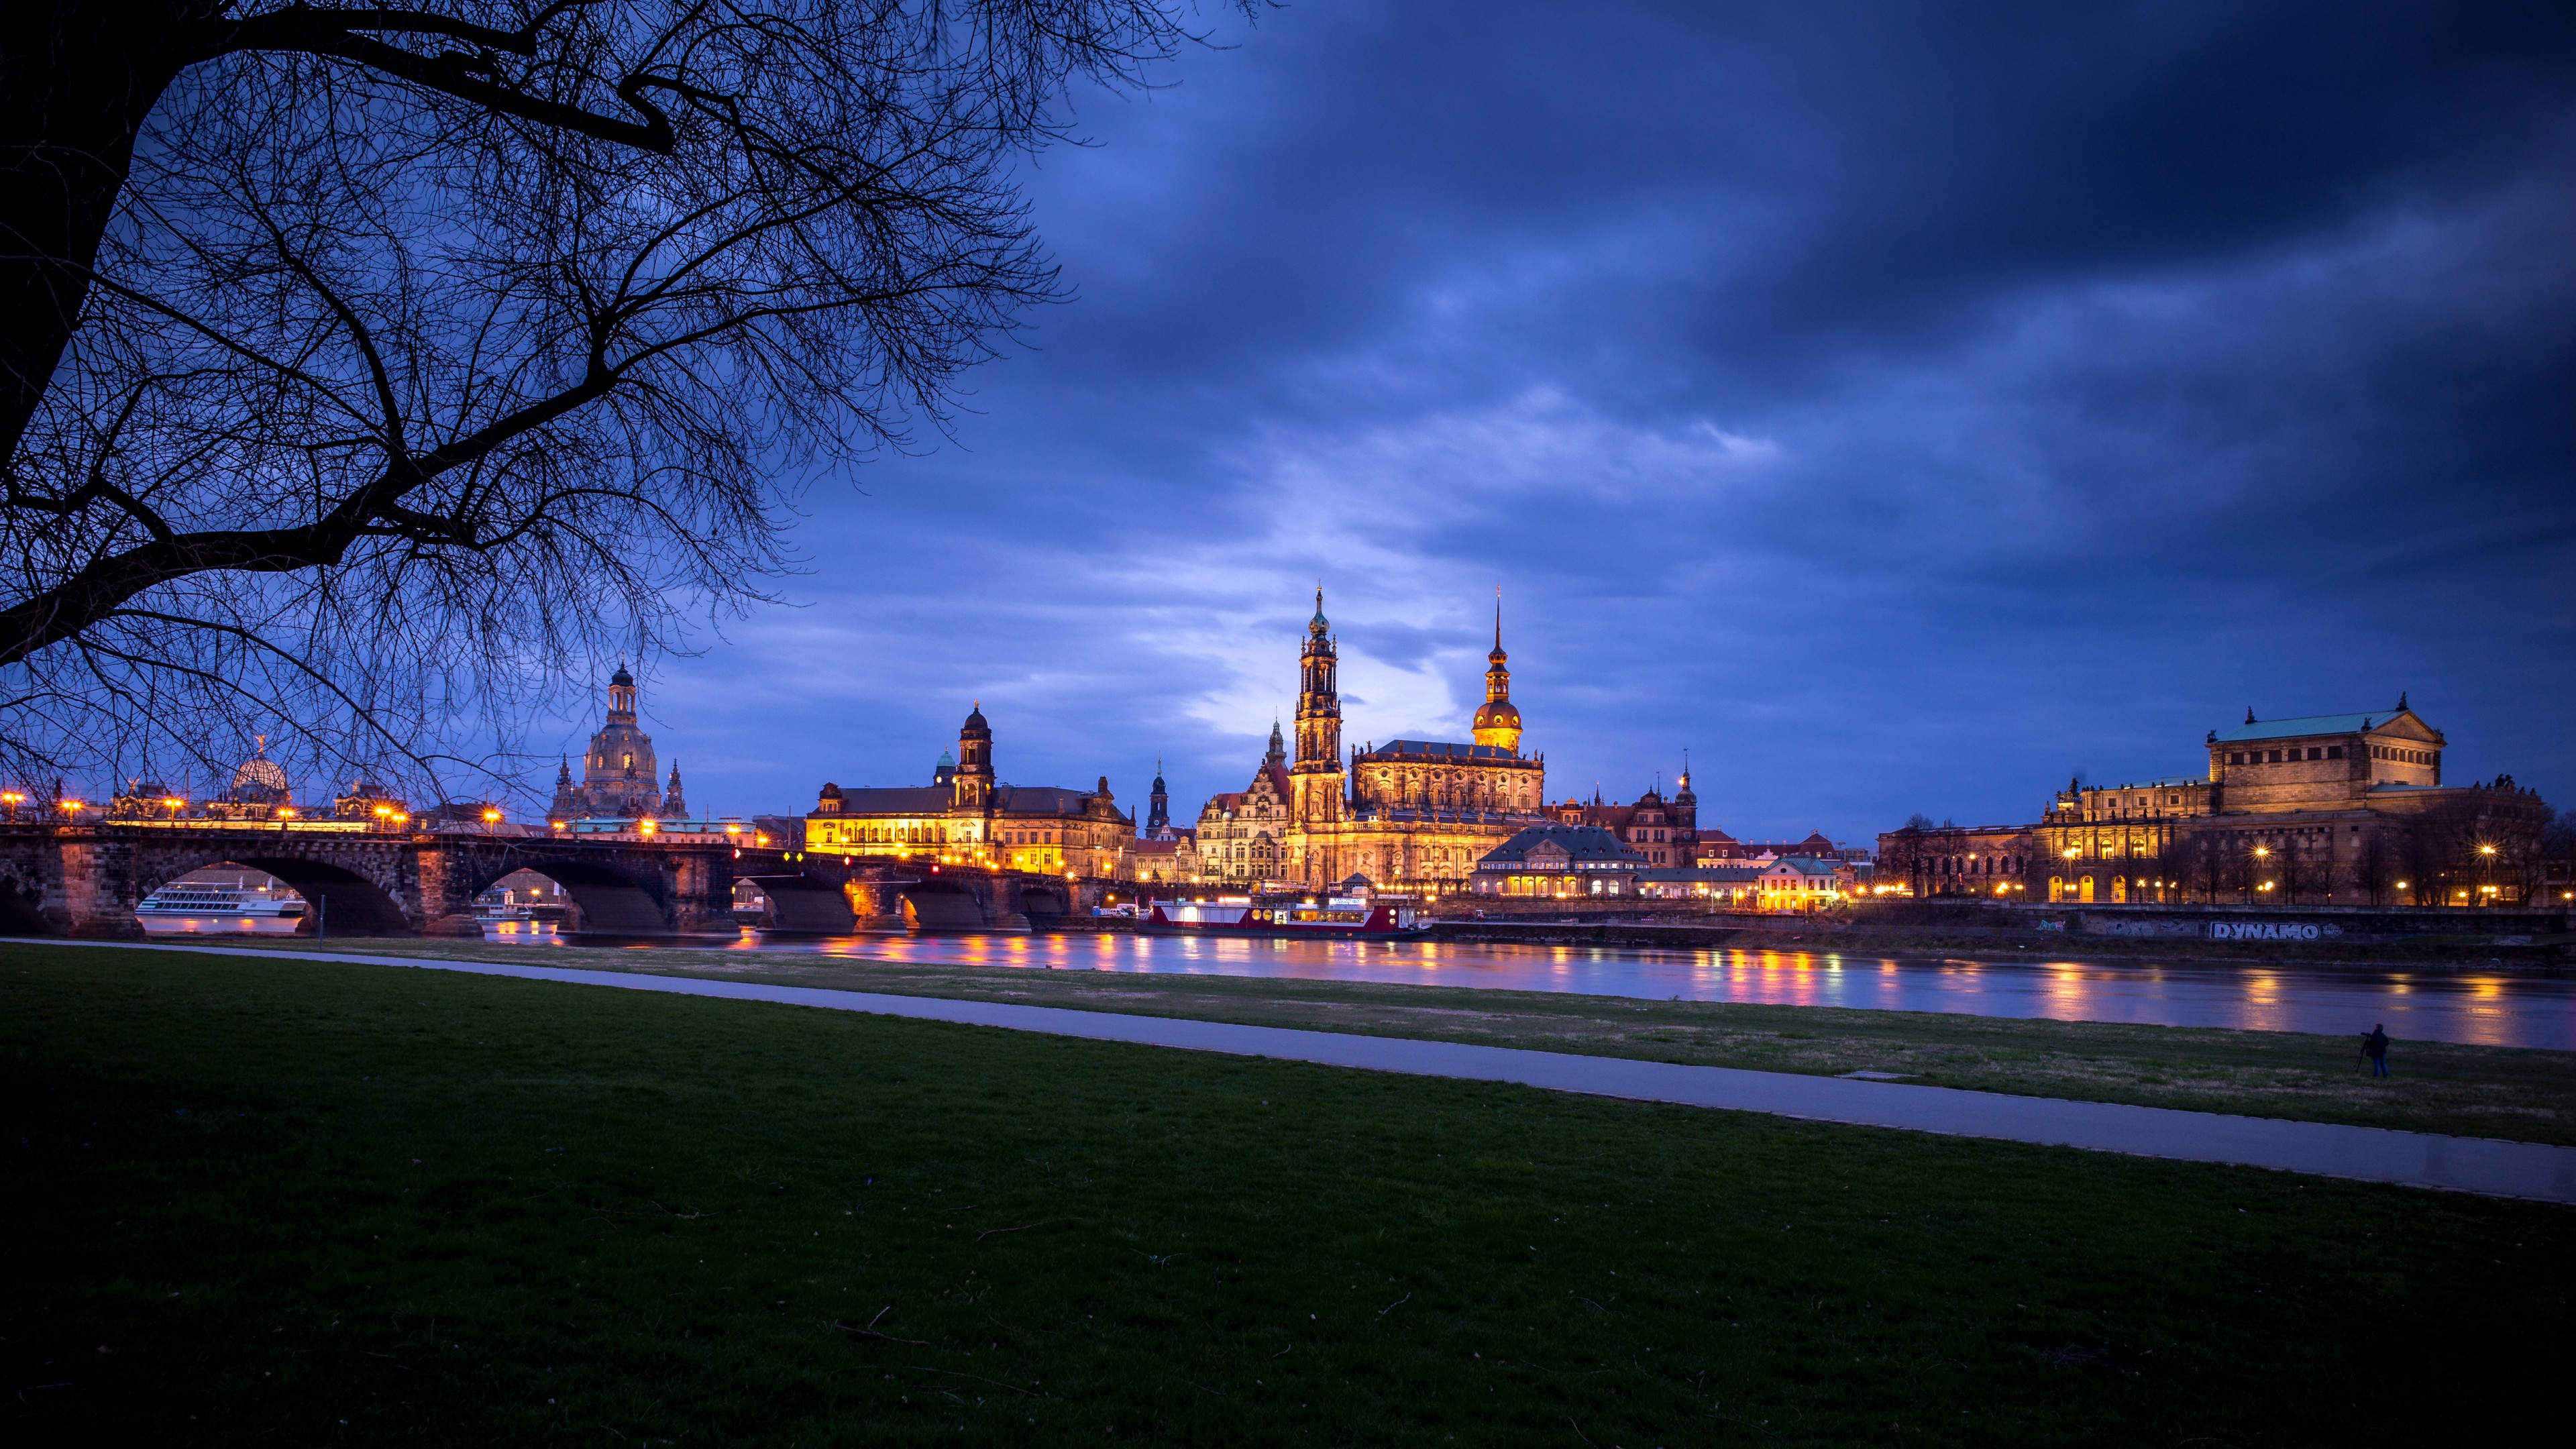 building, House, City, Cityscape, Dresden, Germany, Evening, Lights, Cathedral, Clouds, River, Trees, Grass, Bridge, Reflection, Old building, Ship, Path, Church, Tower, Long exposure Wallpaper